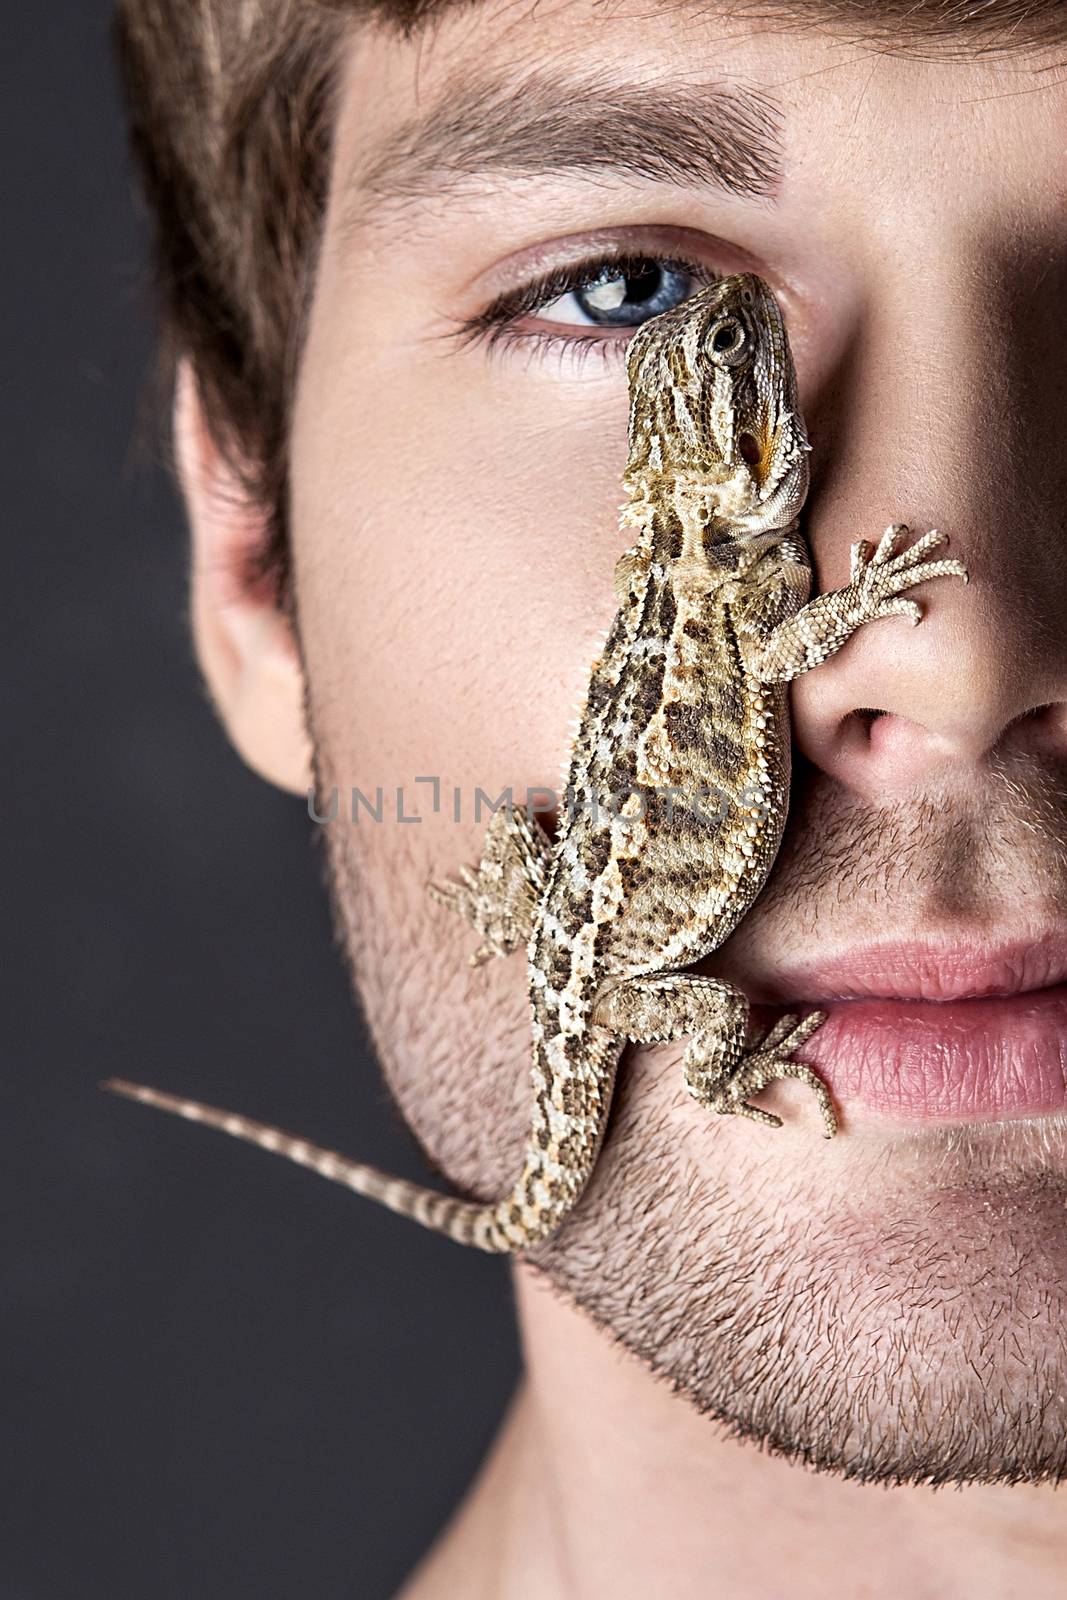 Portrait of a Young Handsome Man with Lizard on His Face by Multipedia